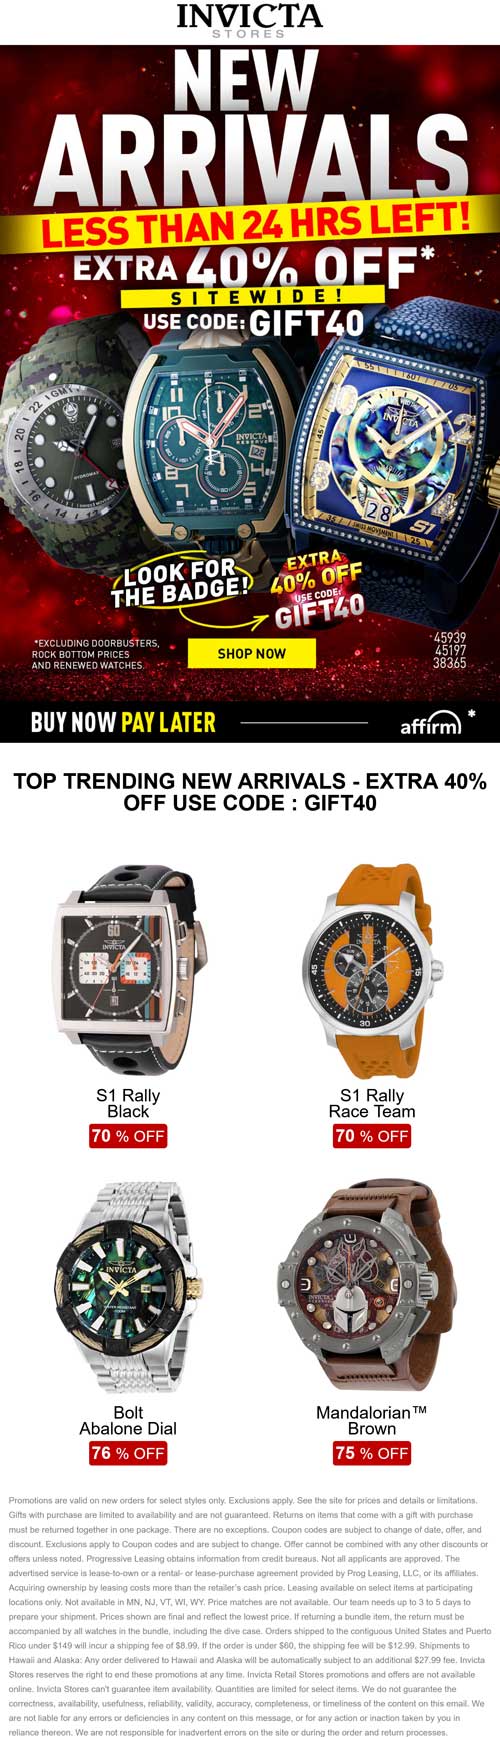 Extra 40% off all watches online today at Invicta via promo code GIFT40 #invicta